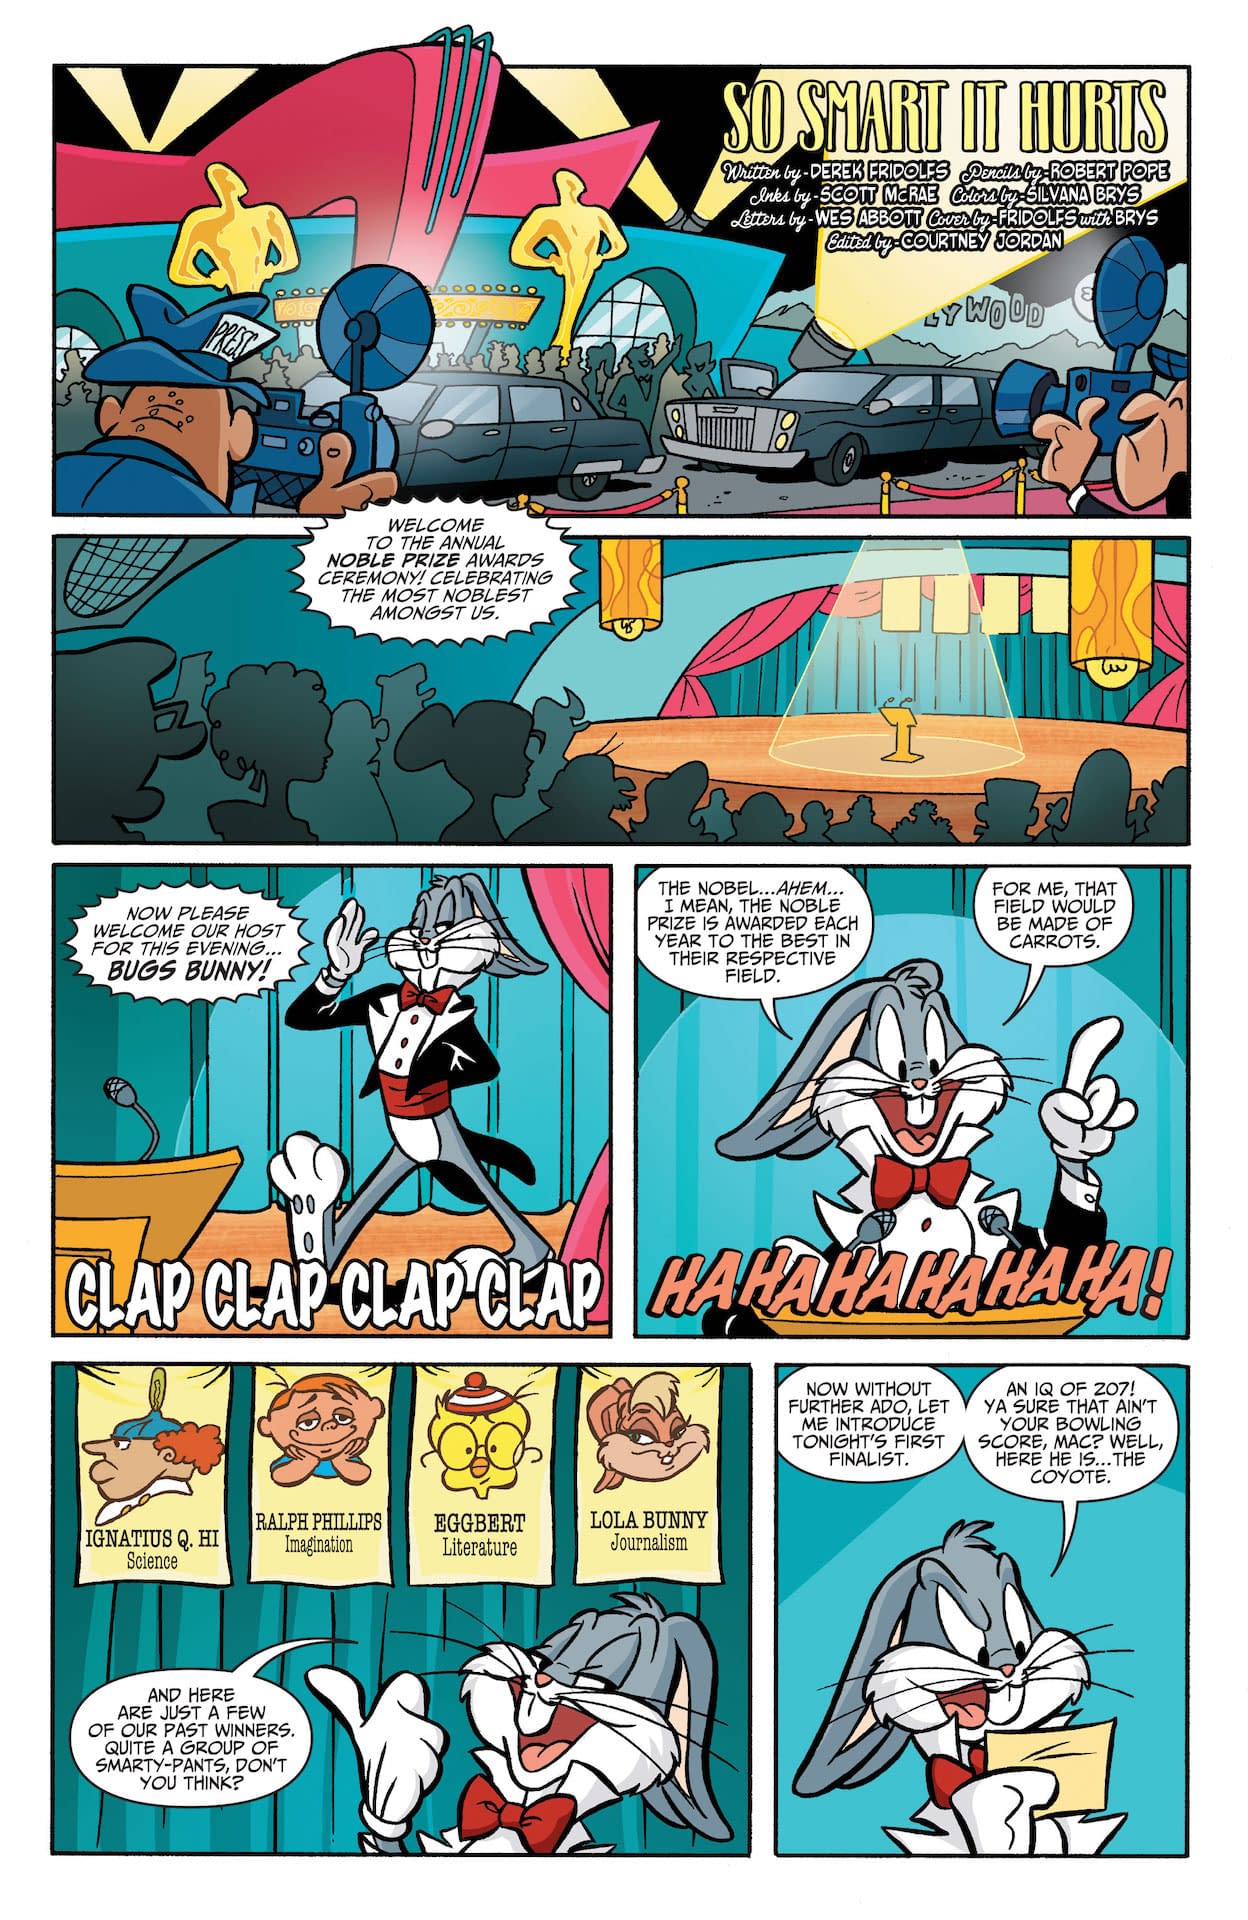 Looney Tunes #269 Preview: Triple Threat Match